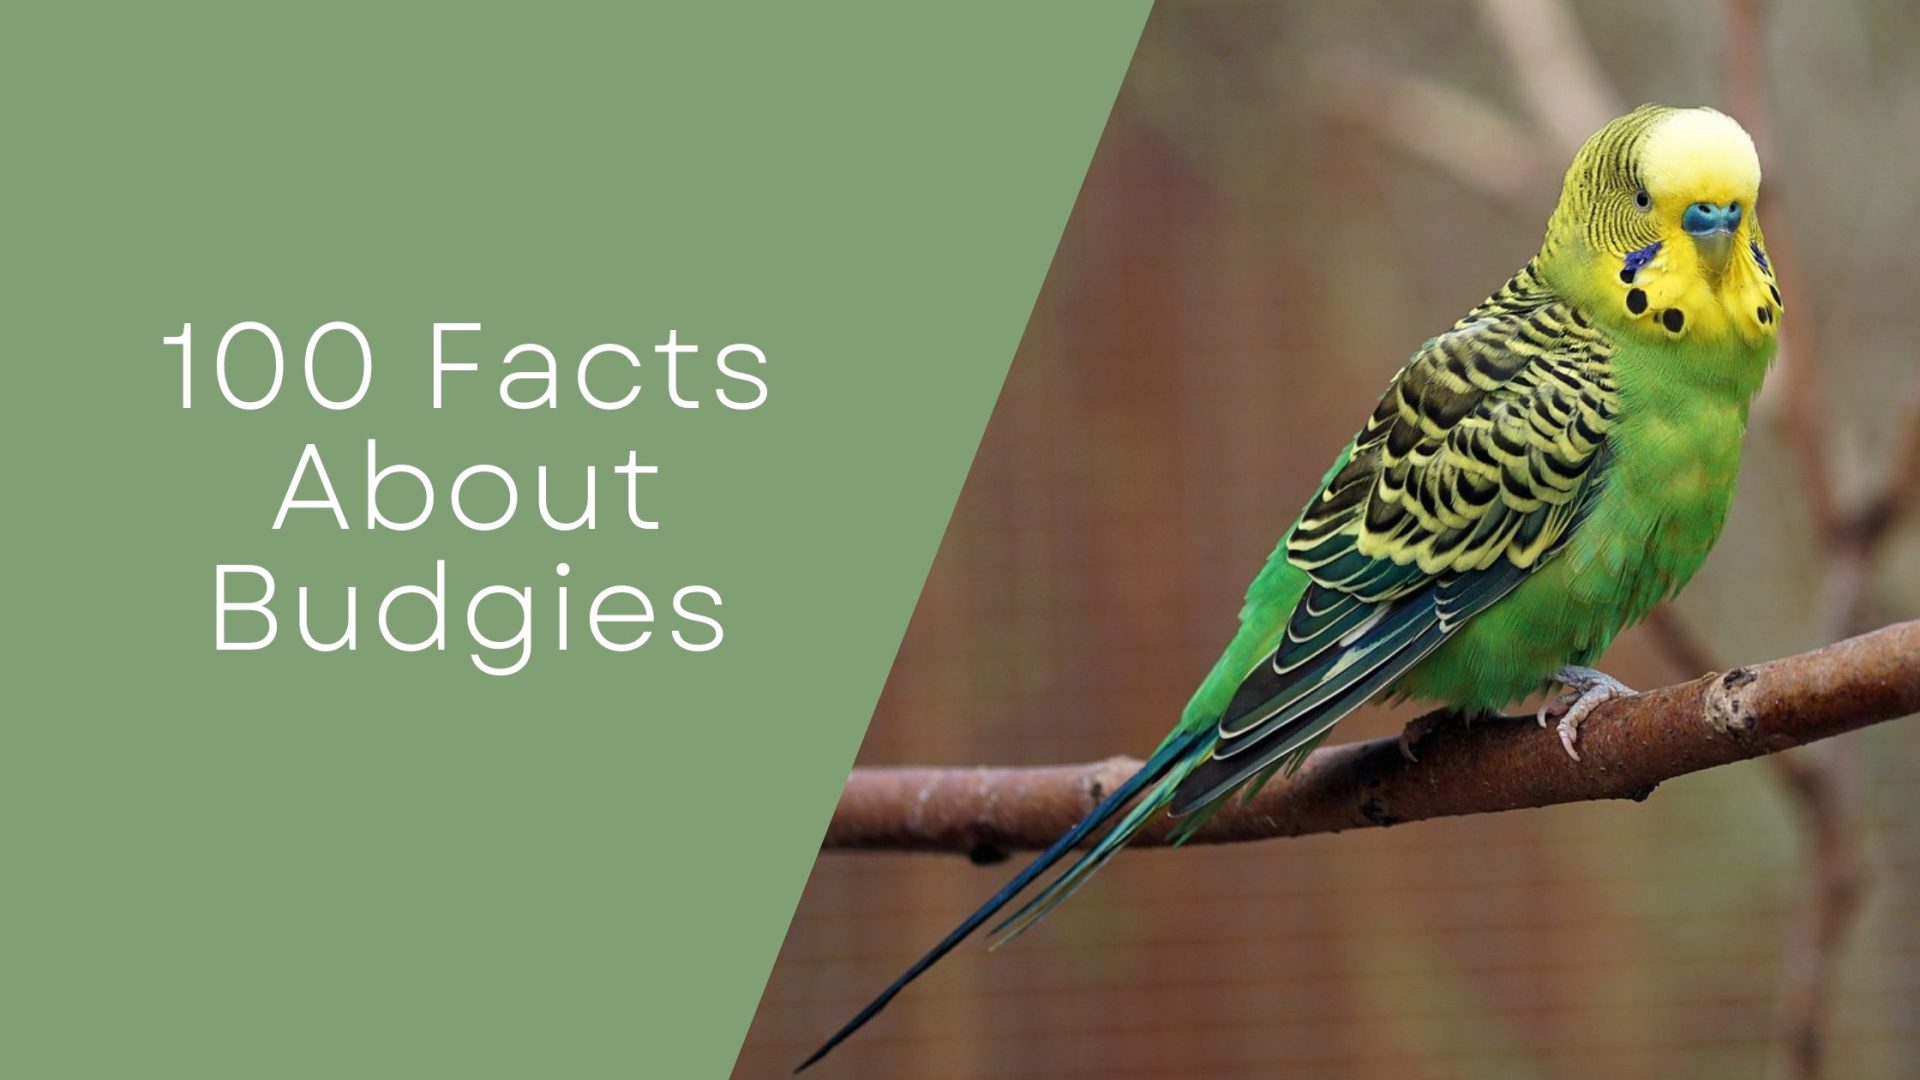 100 Facts About Budgies